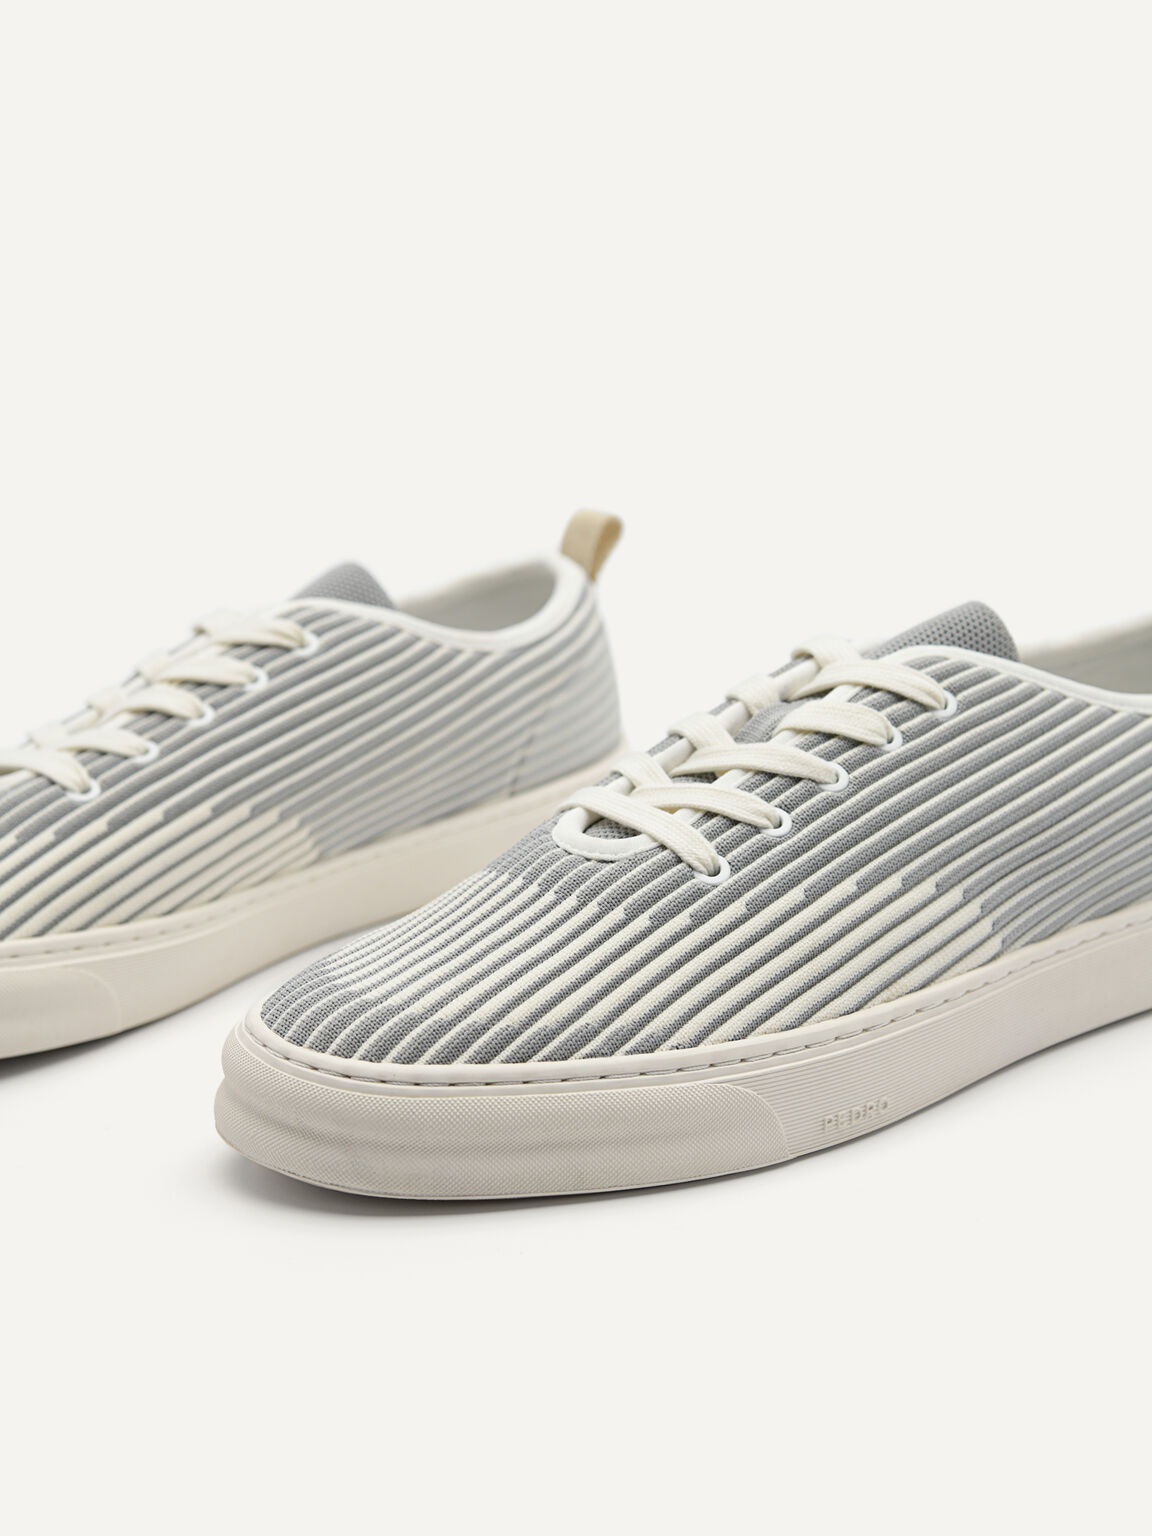 rePEDRO Pleated Court Sneakers, Light Grey